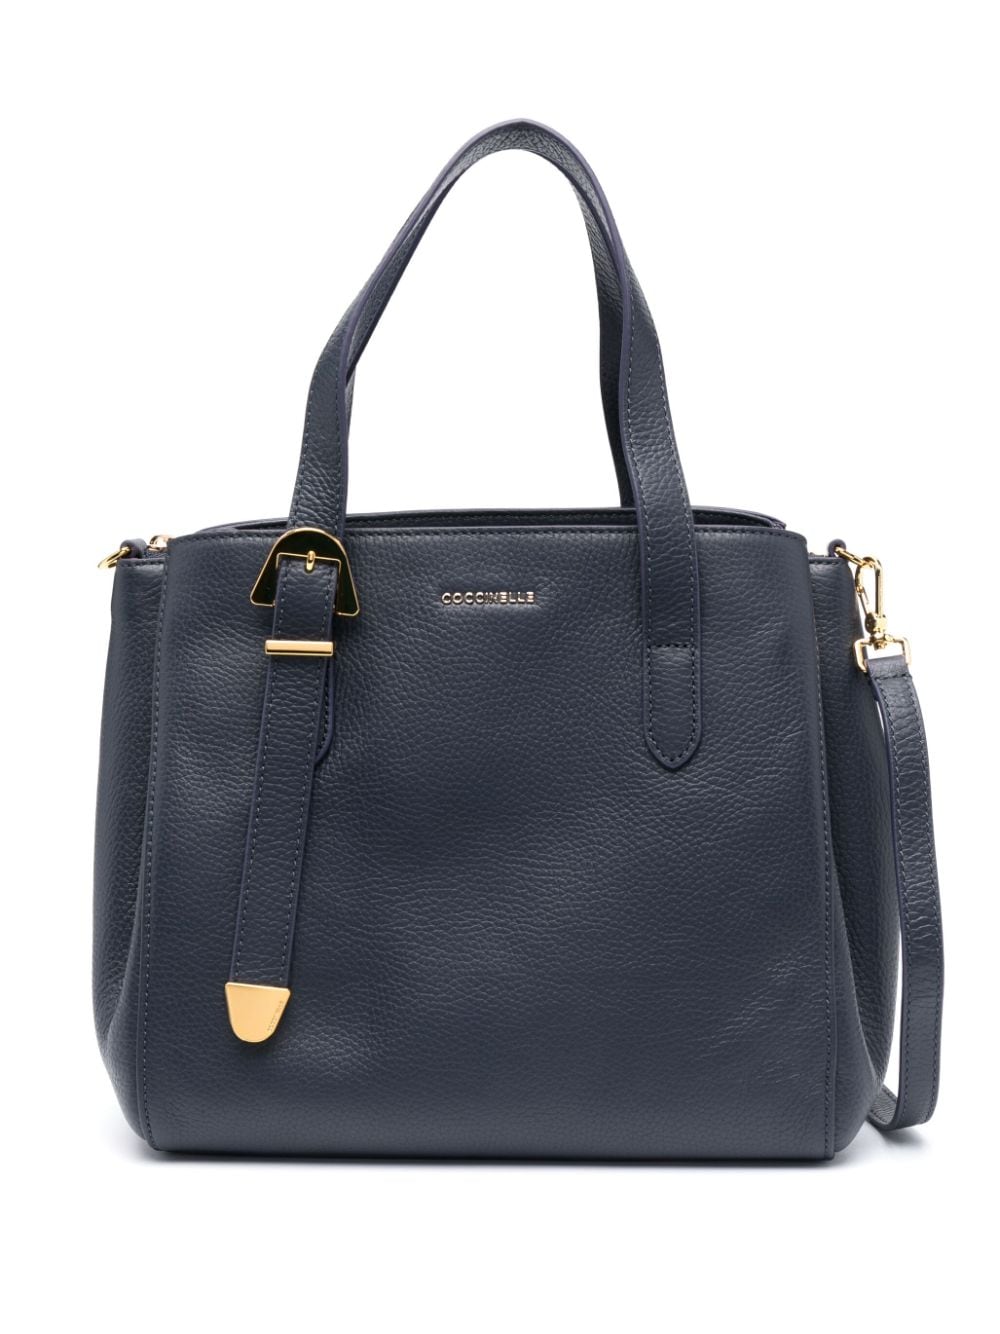 COCCINELLE MEDIUM GLEEN LEATHER TOTE BAG